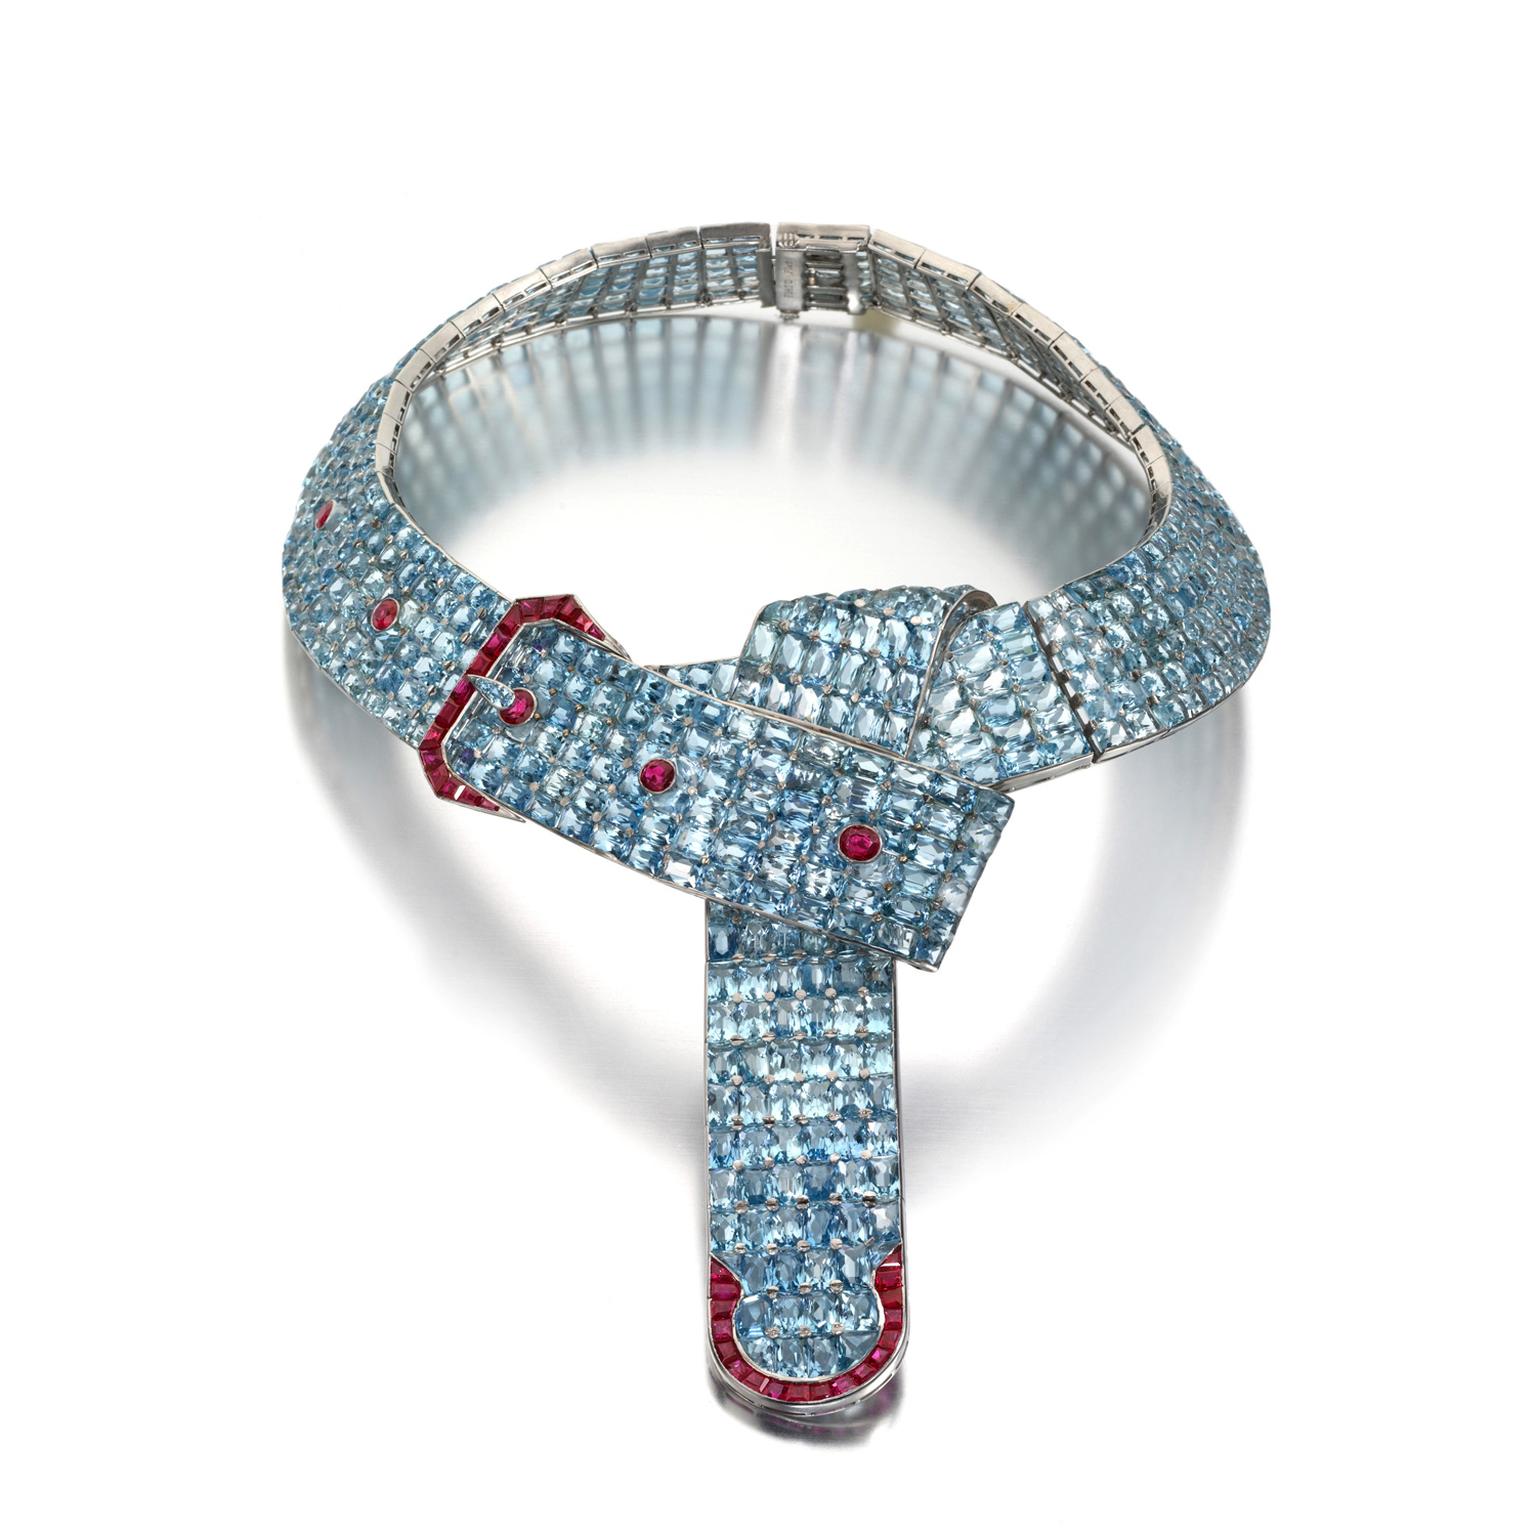 Fulco di Verdura belt necklace in pave-set aquamarines with ruby accents